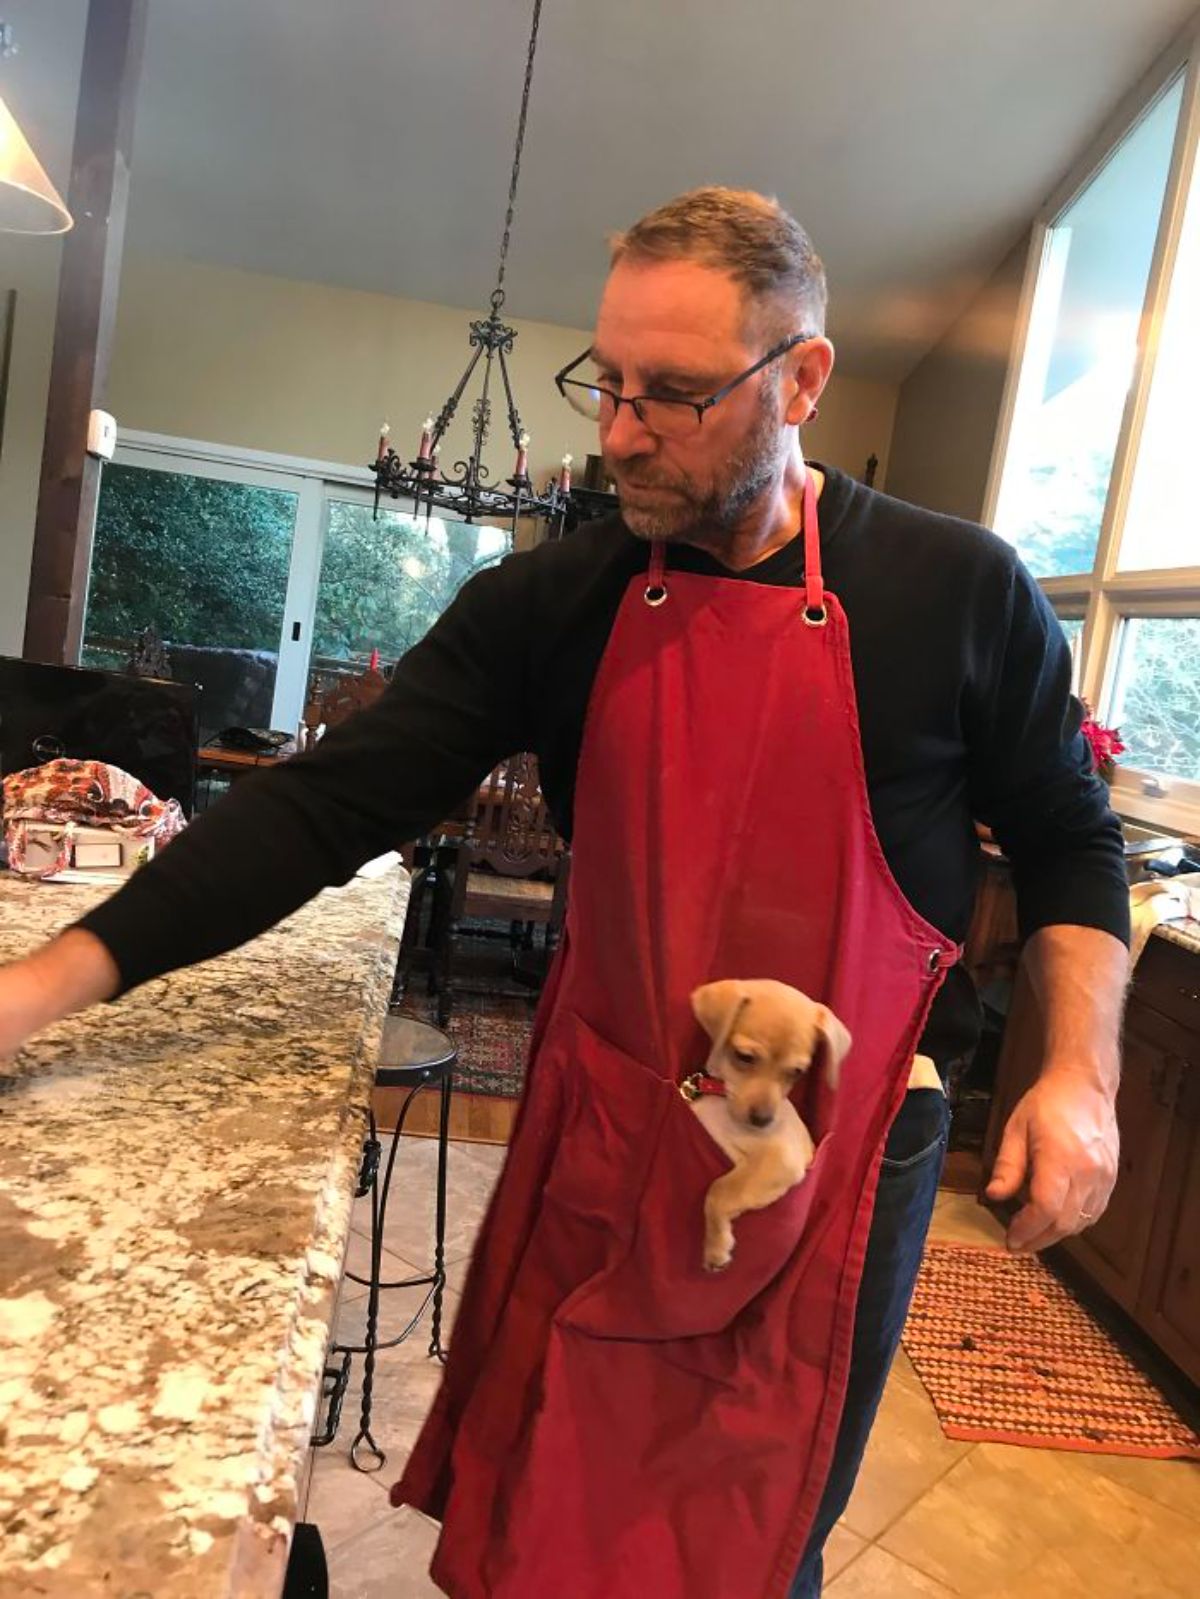 brown puppy in the pocket of a red apron a man is wearing in a kitchen